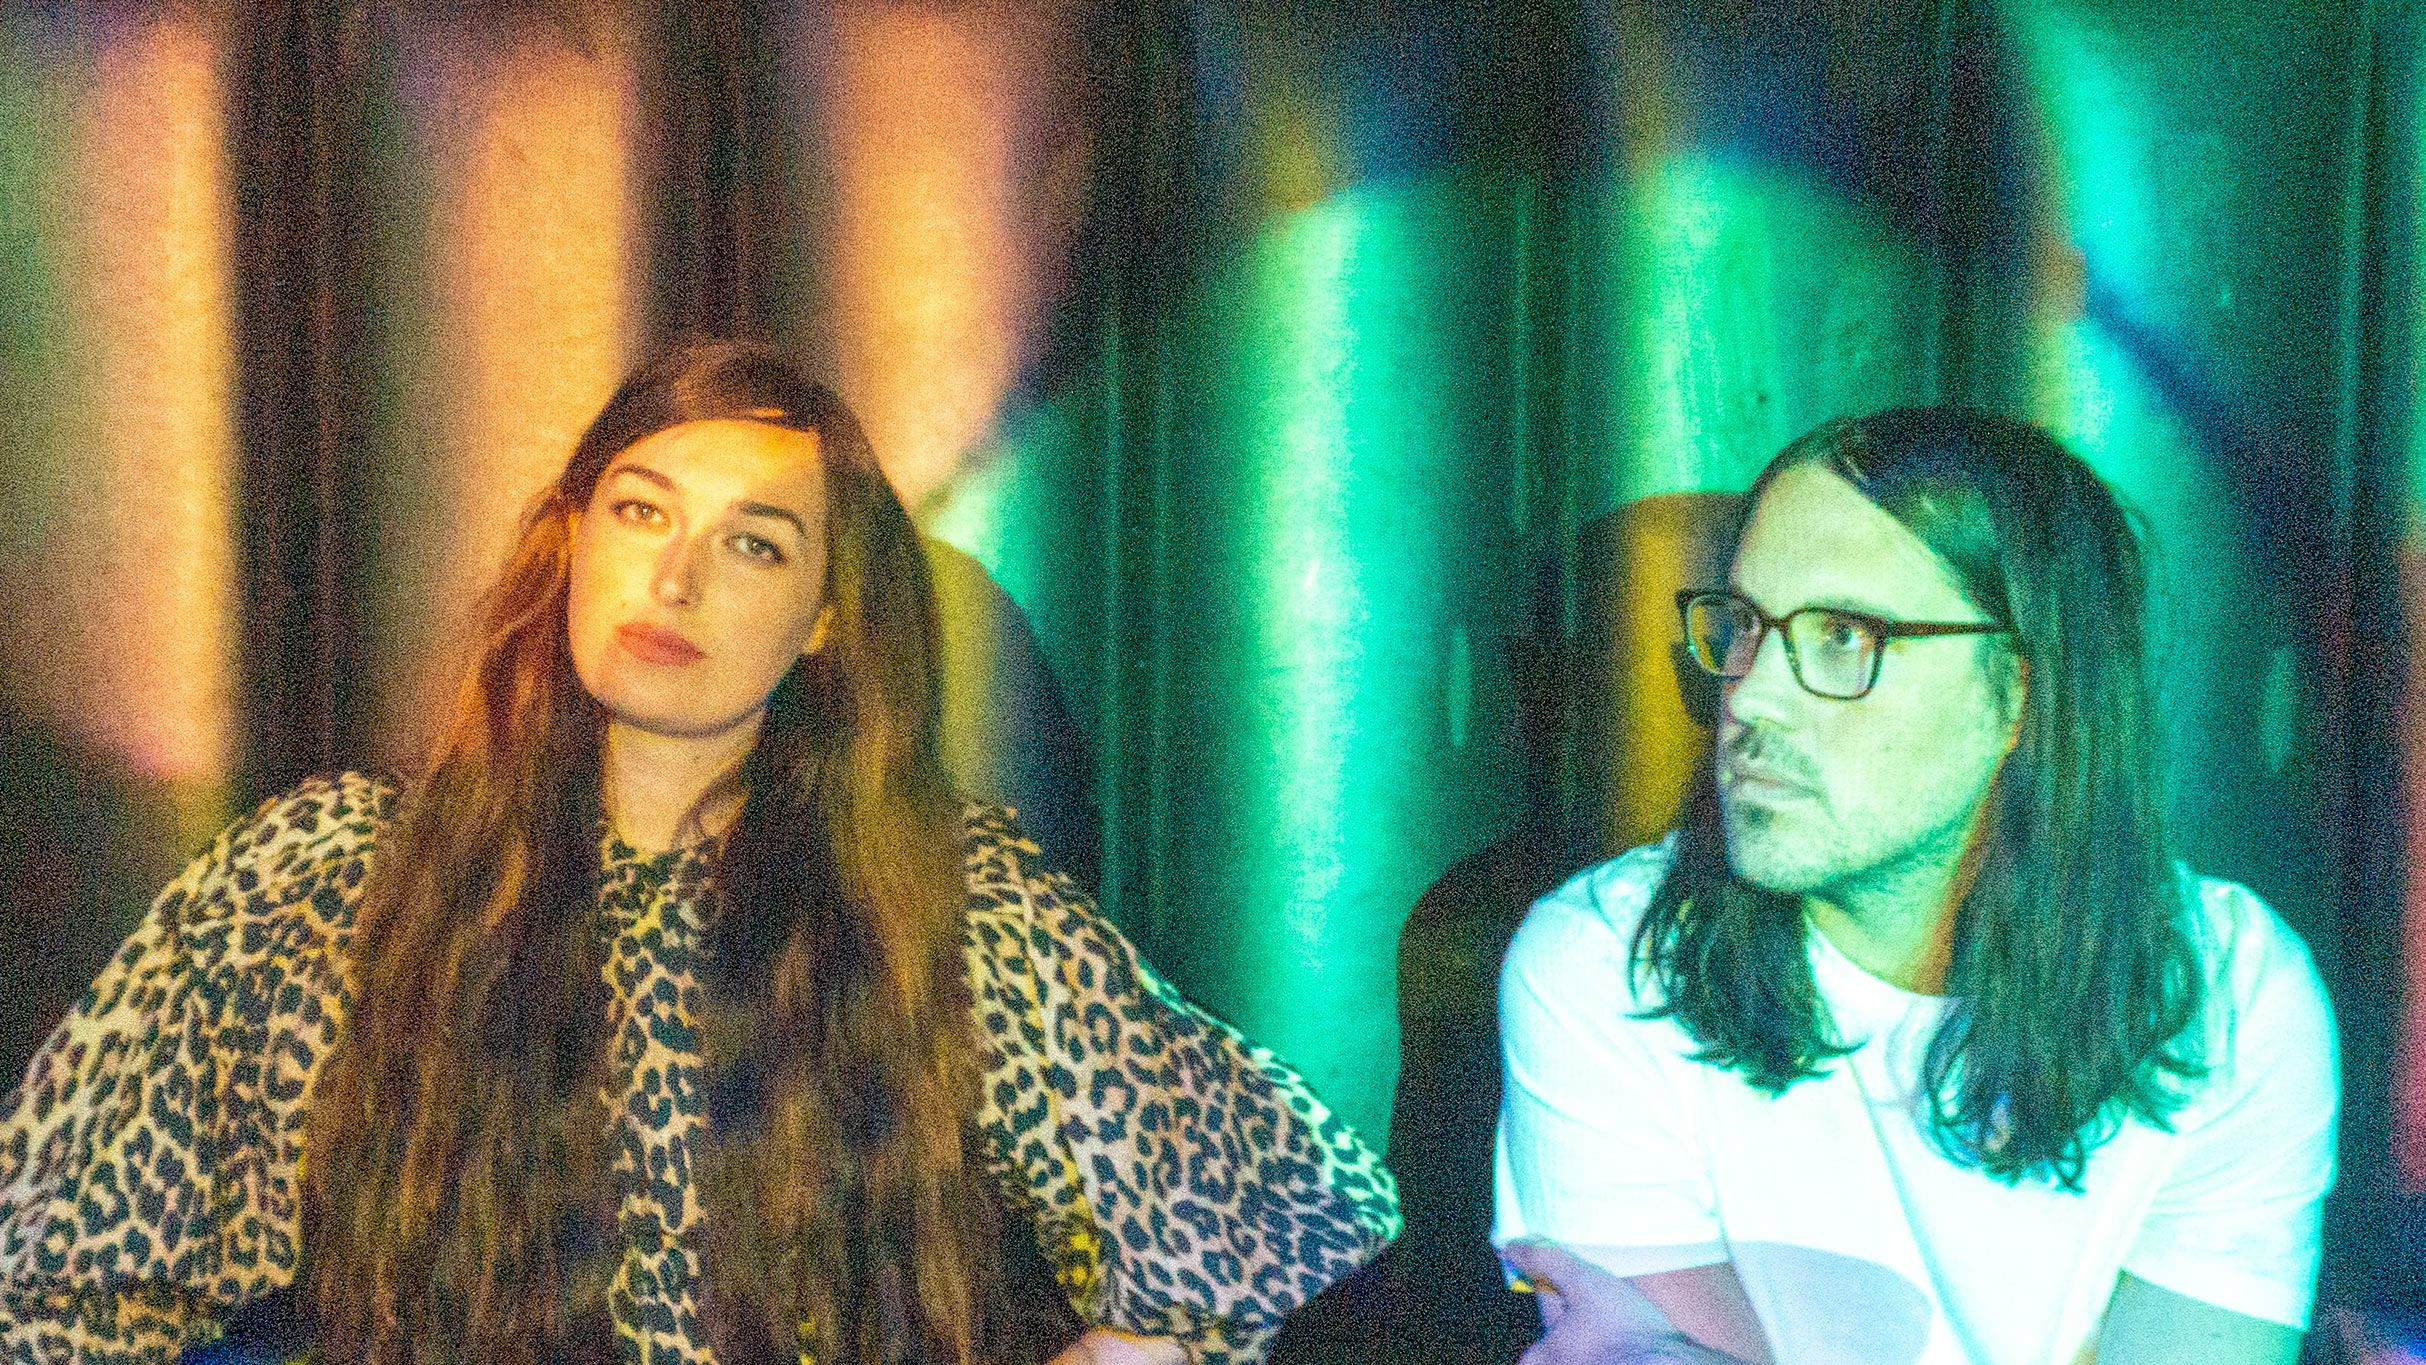 Cults presale code for approved tickets in New Orleans